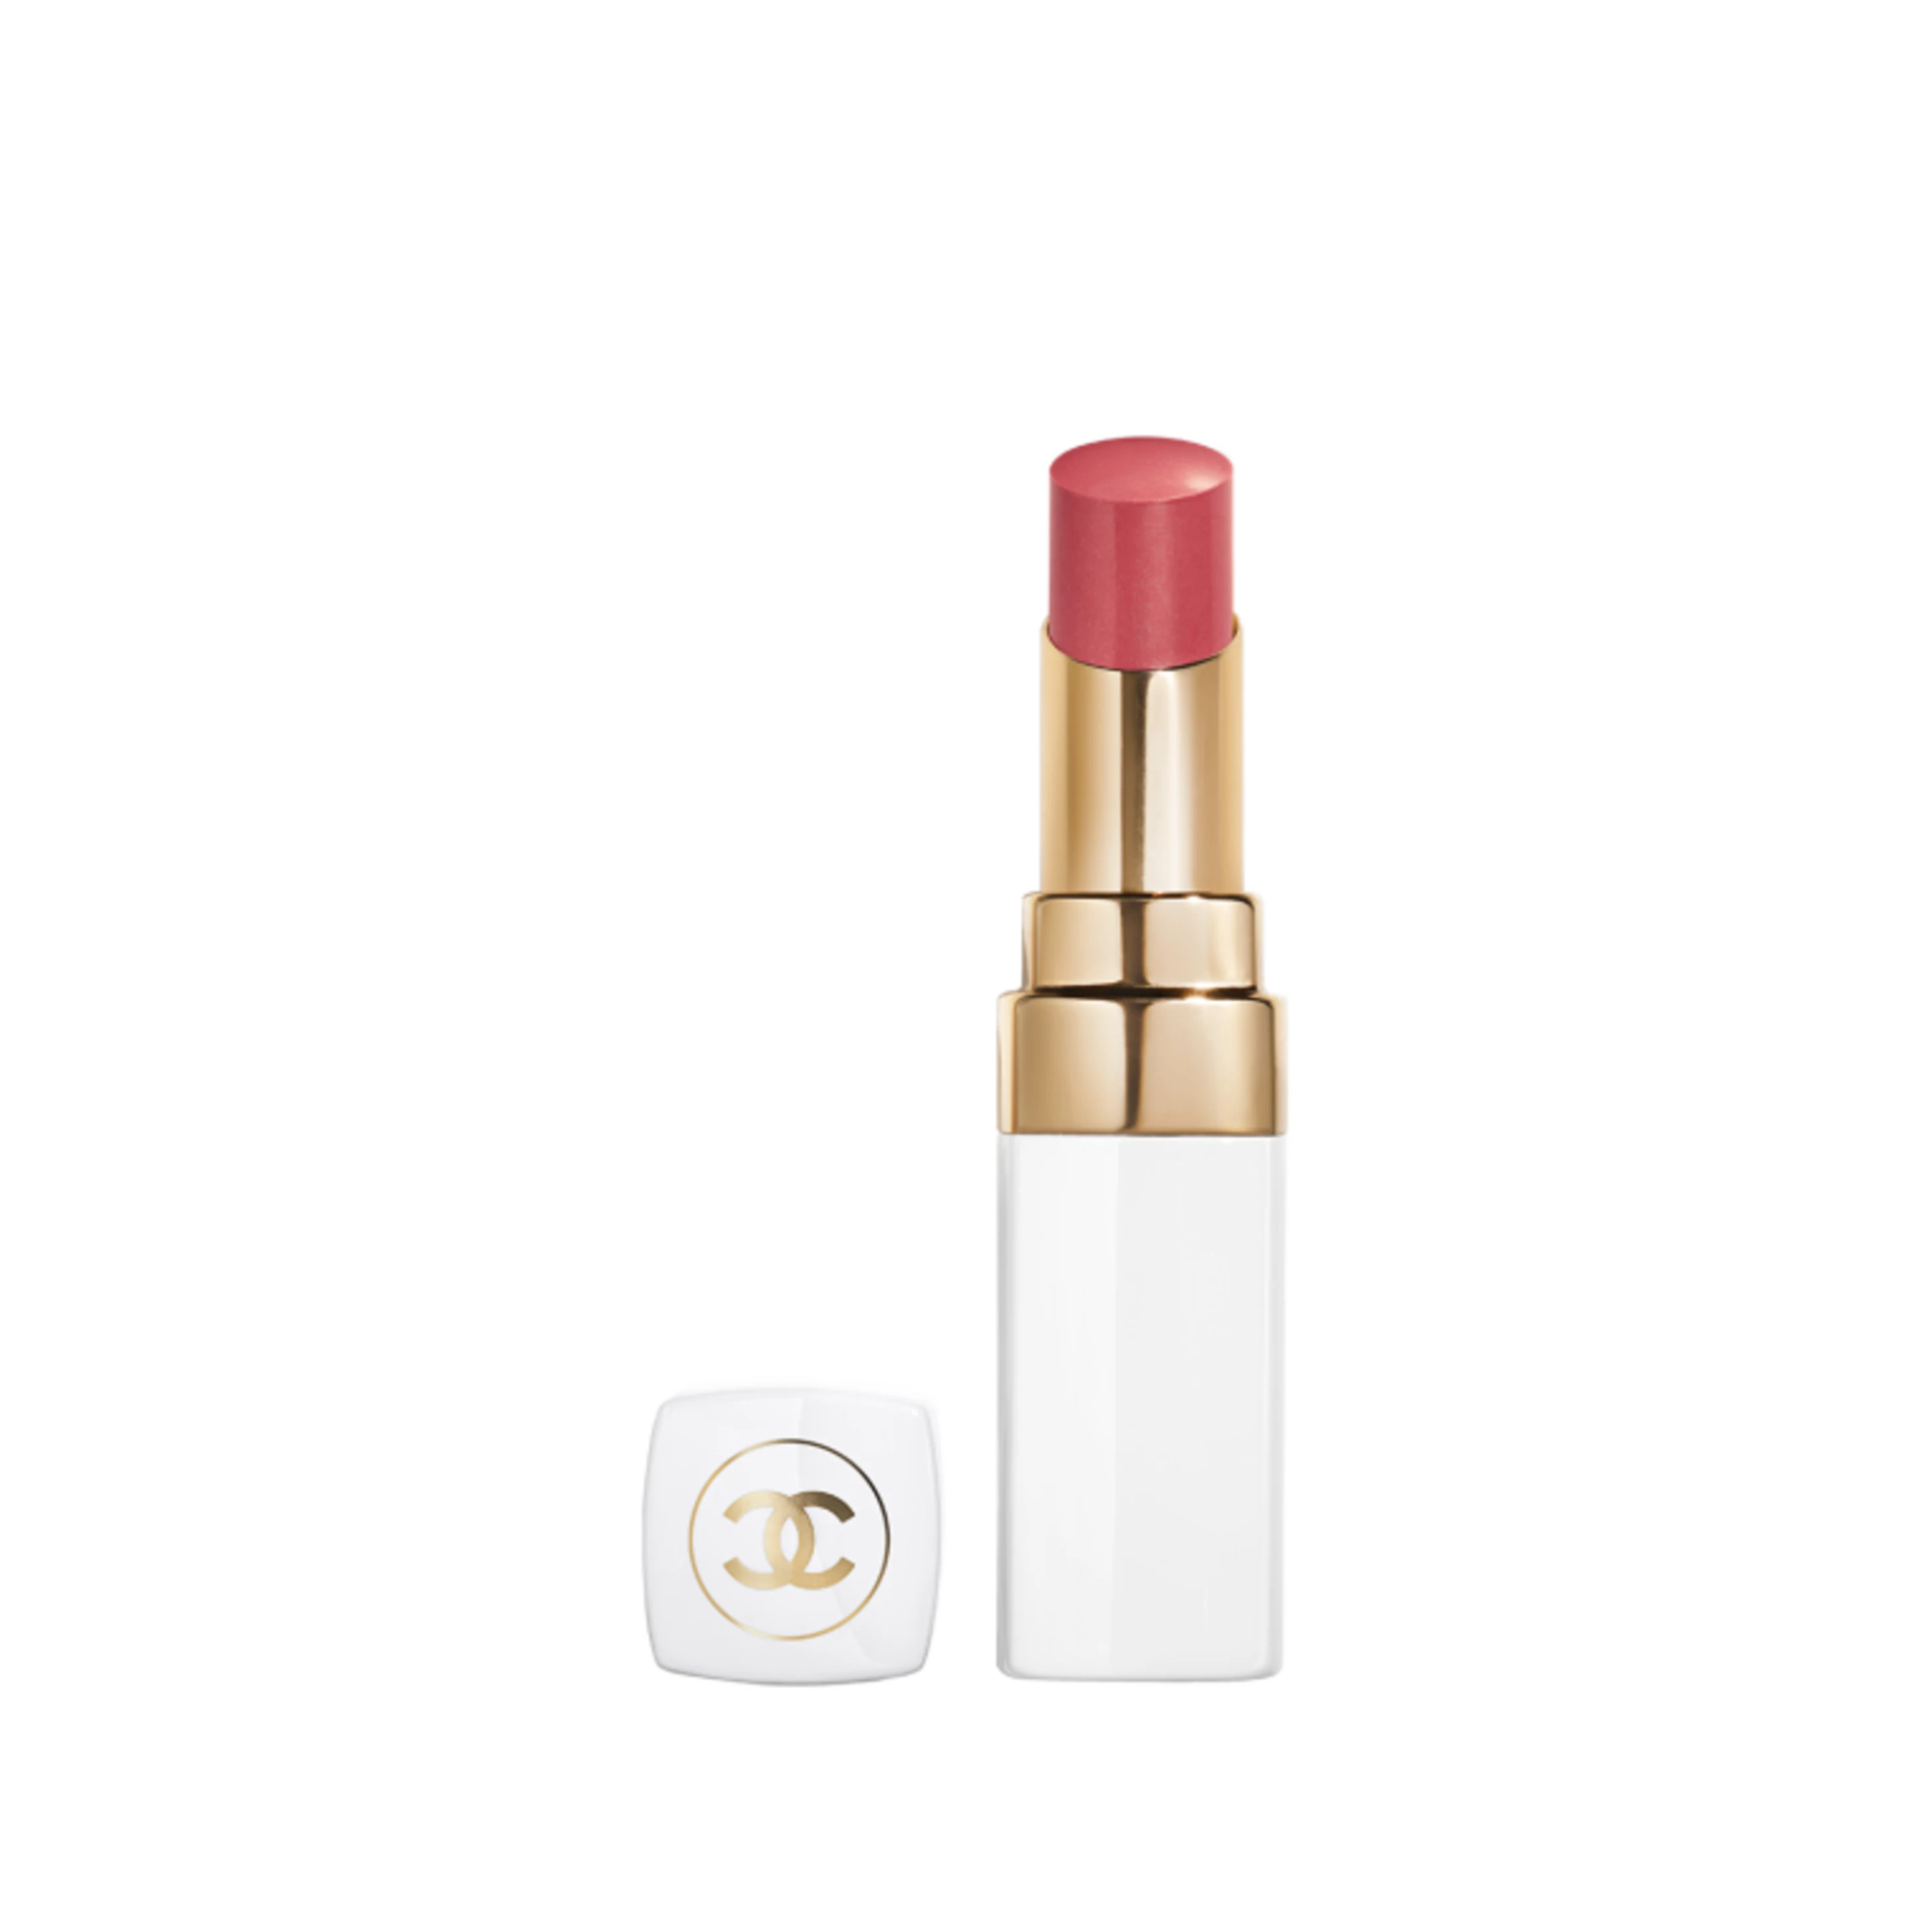 Son Thỏi Chanel Rouge Coco Baume  Nika Cosmetics